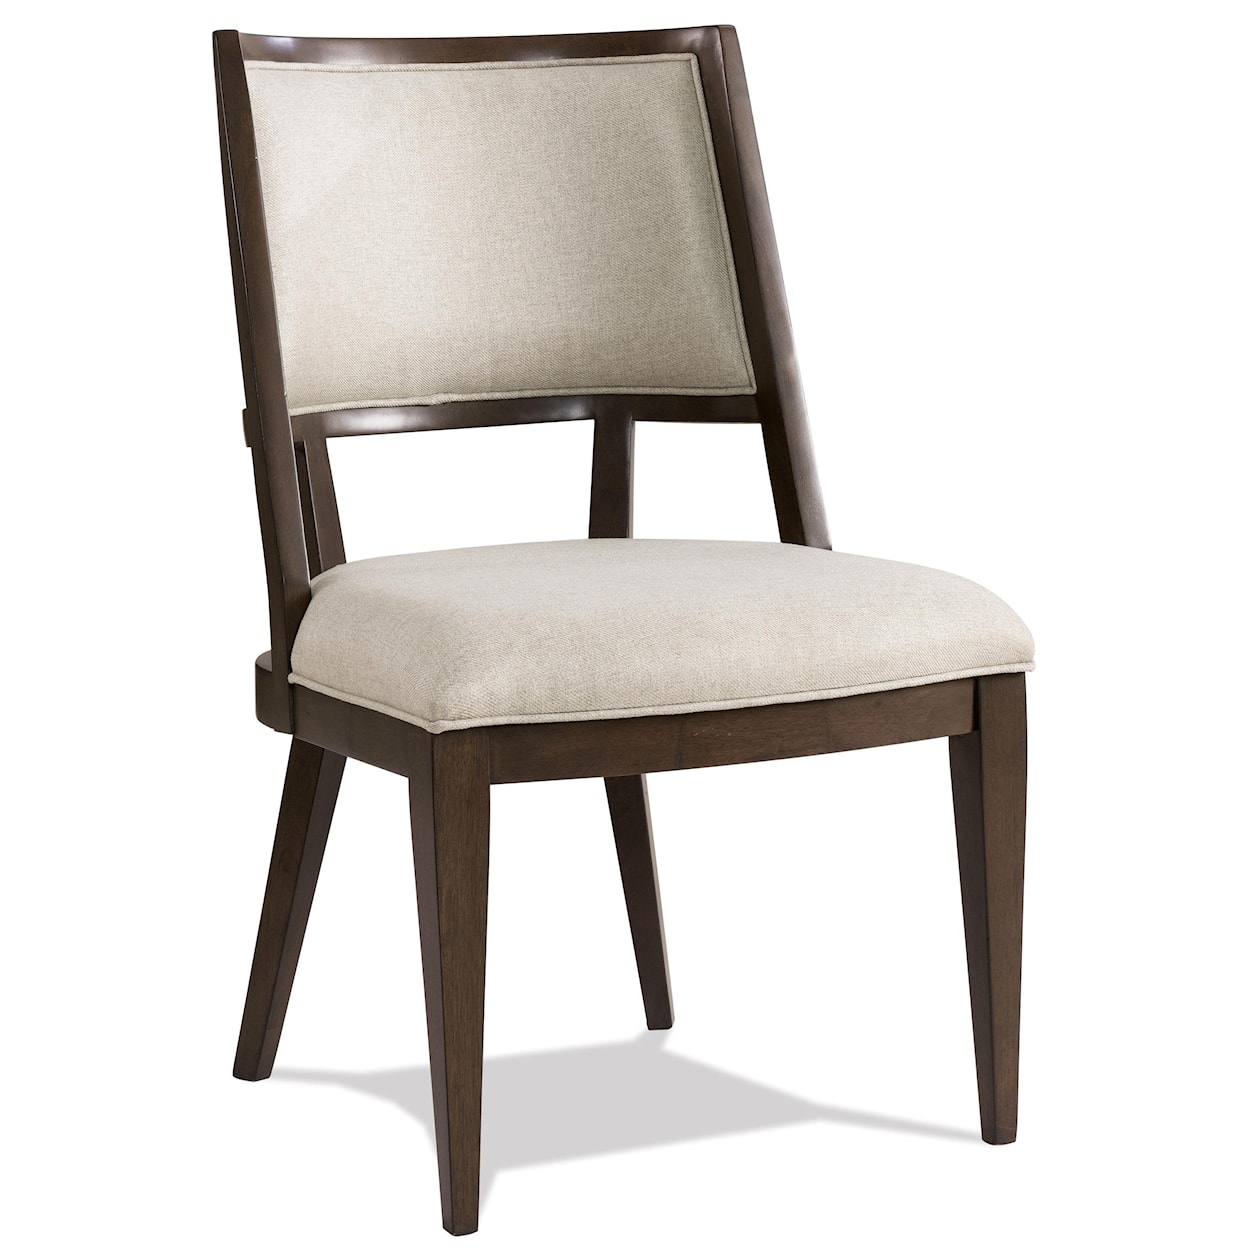 Riverside Furniture Getry Gentry Upholstered Hostess Chair